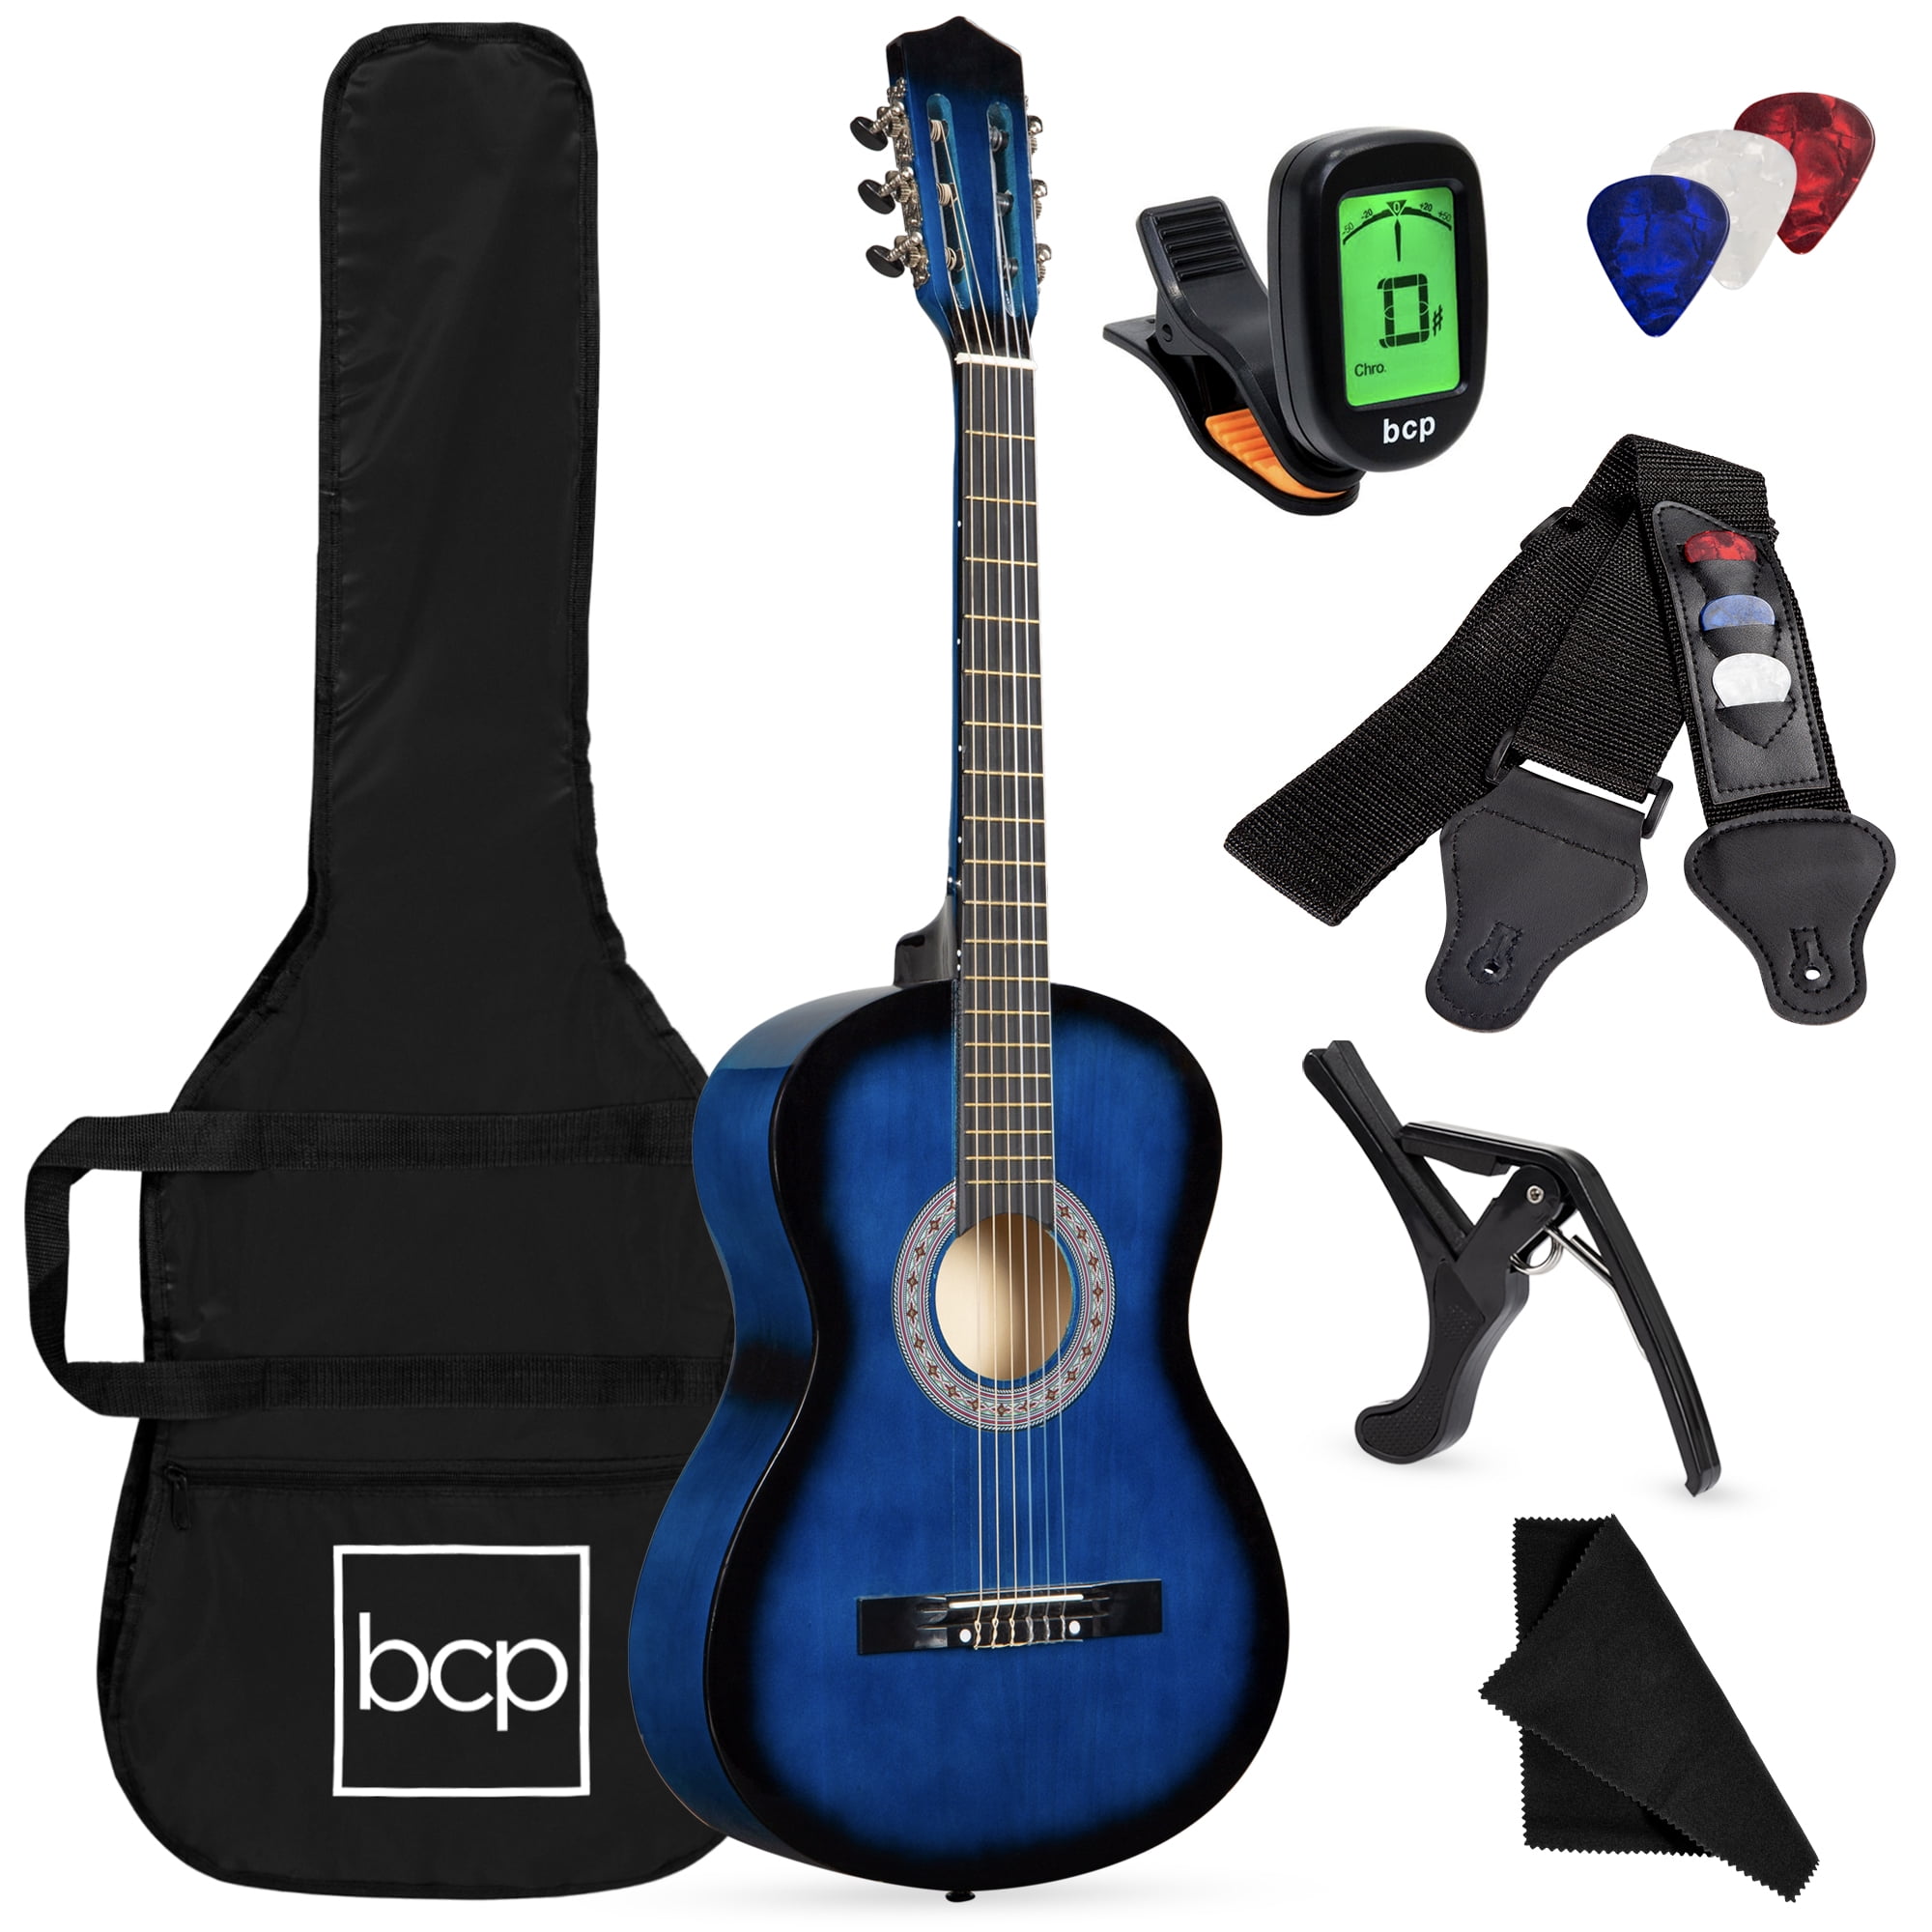 Beginner 30 Inch Acoustic Classical Guitar Nylon Strings Guitar Starter Kits for Beginners Kids Student Kit with Bag & Accessories（Black） 